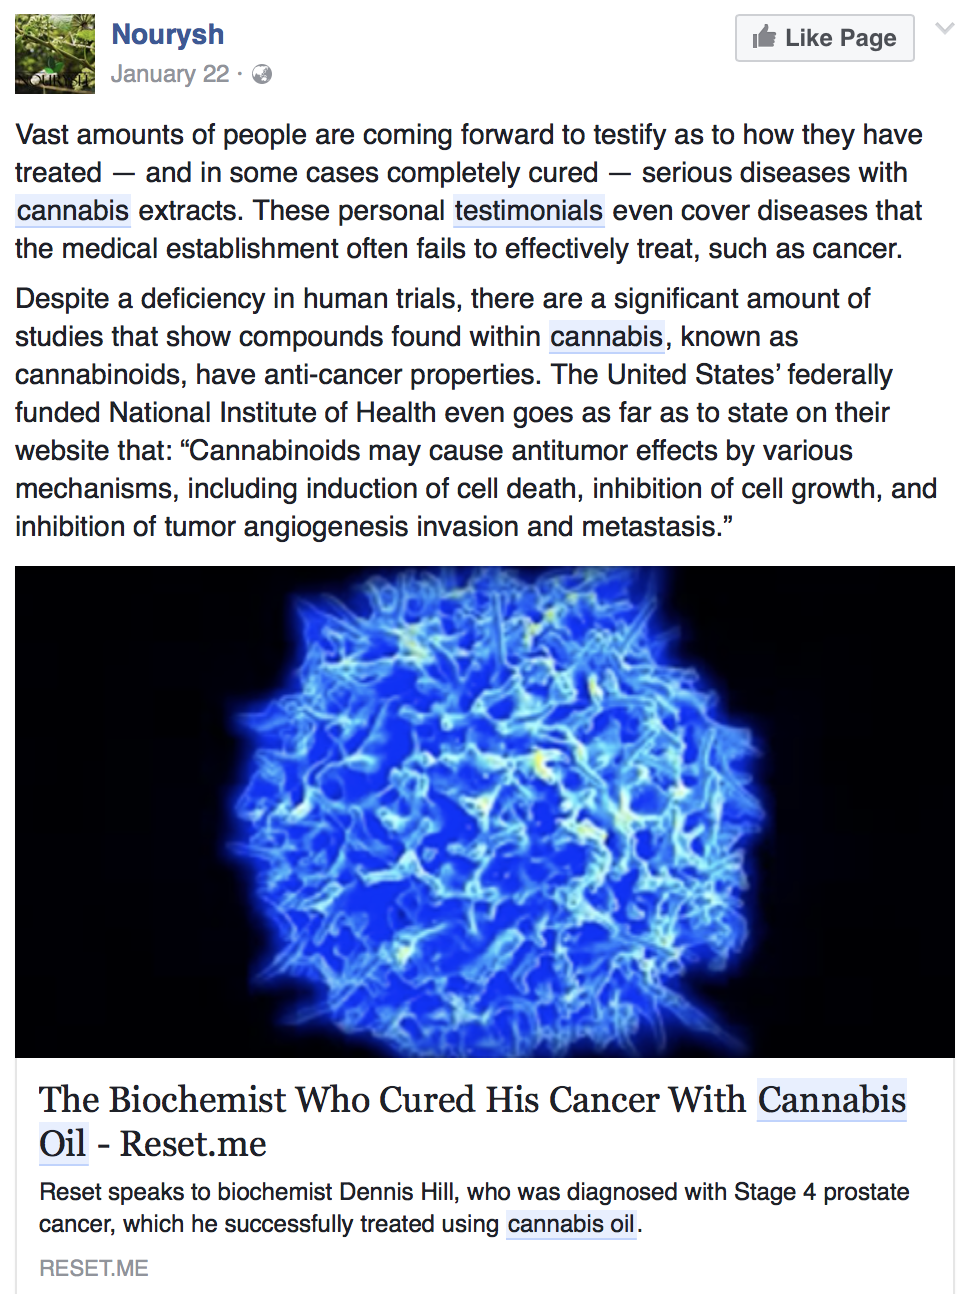 cannabis-oil-cured-his-cancer-2.png